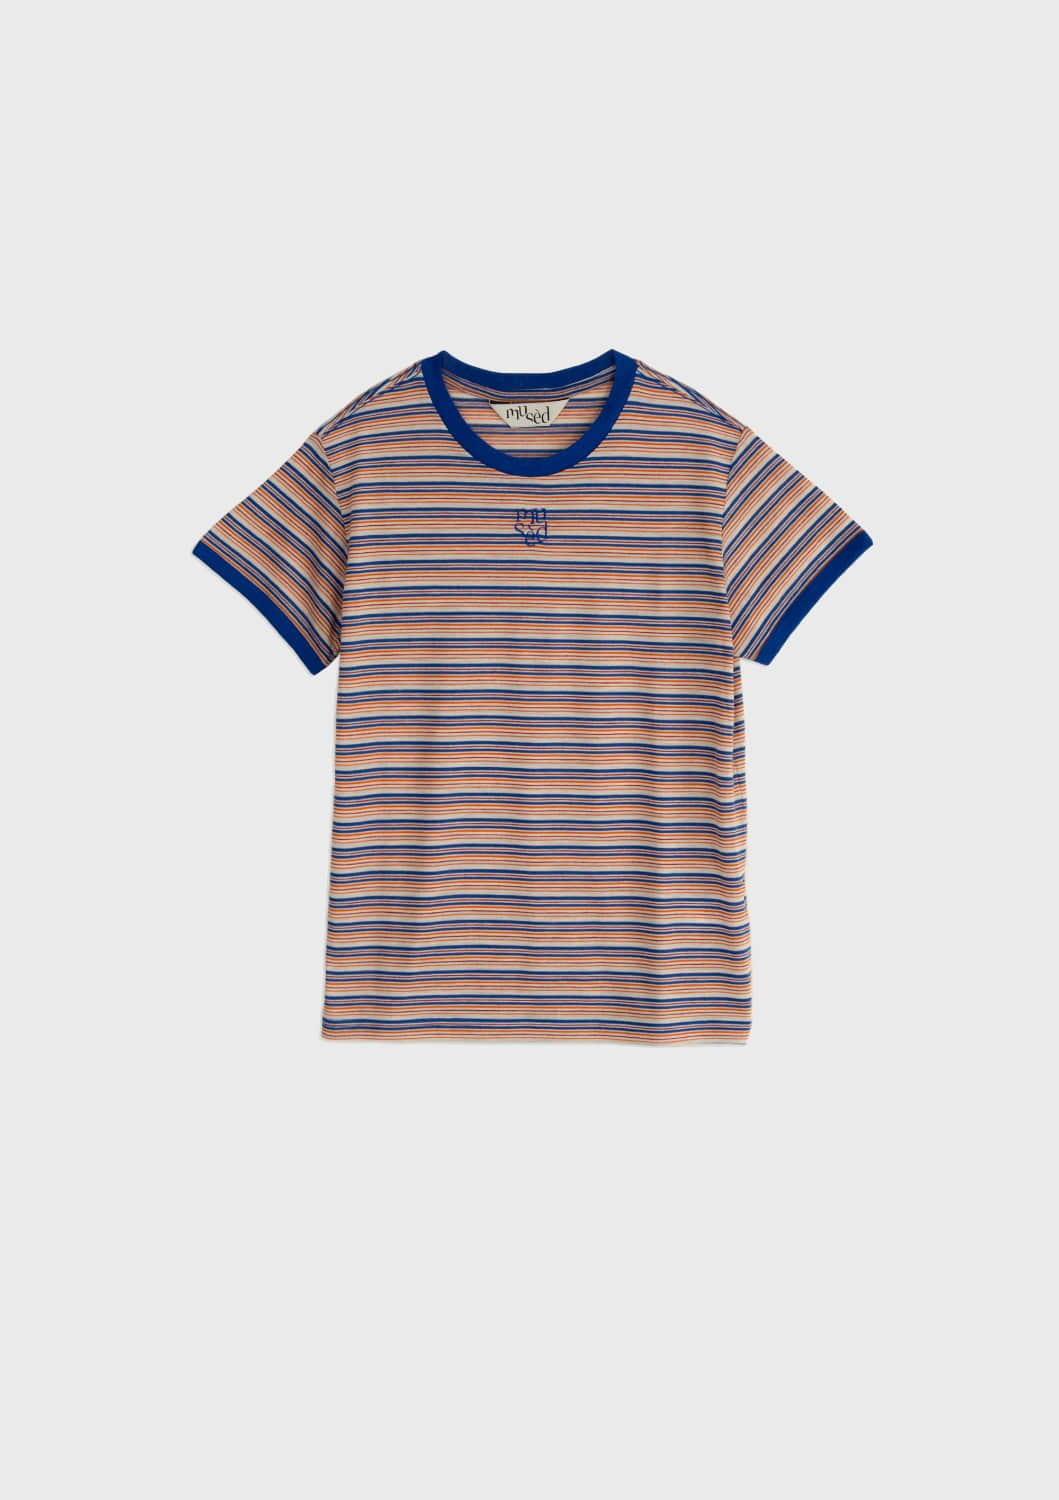 Contrast Rib Patched T-shirts - Stripe